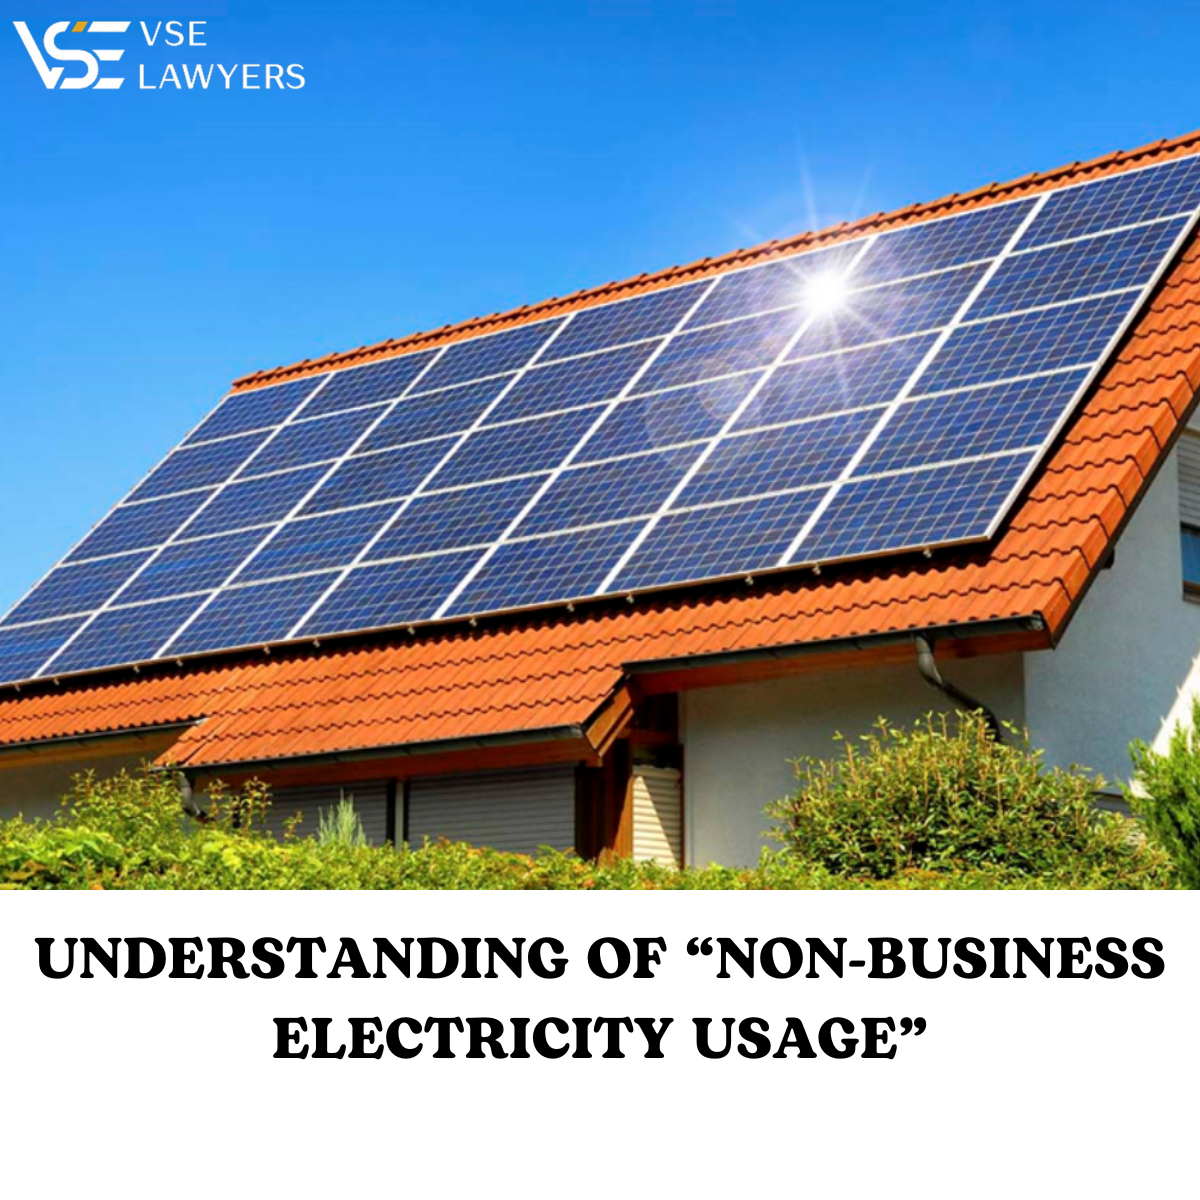 POSSIBLE UNDERSTANDINGS OF “NO INVESTMENT IN ELECTRICITY BUSINESS” FOR ROOFTOP SOLAR